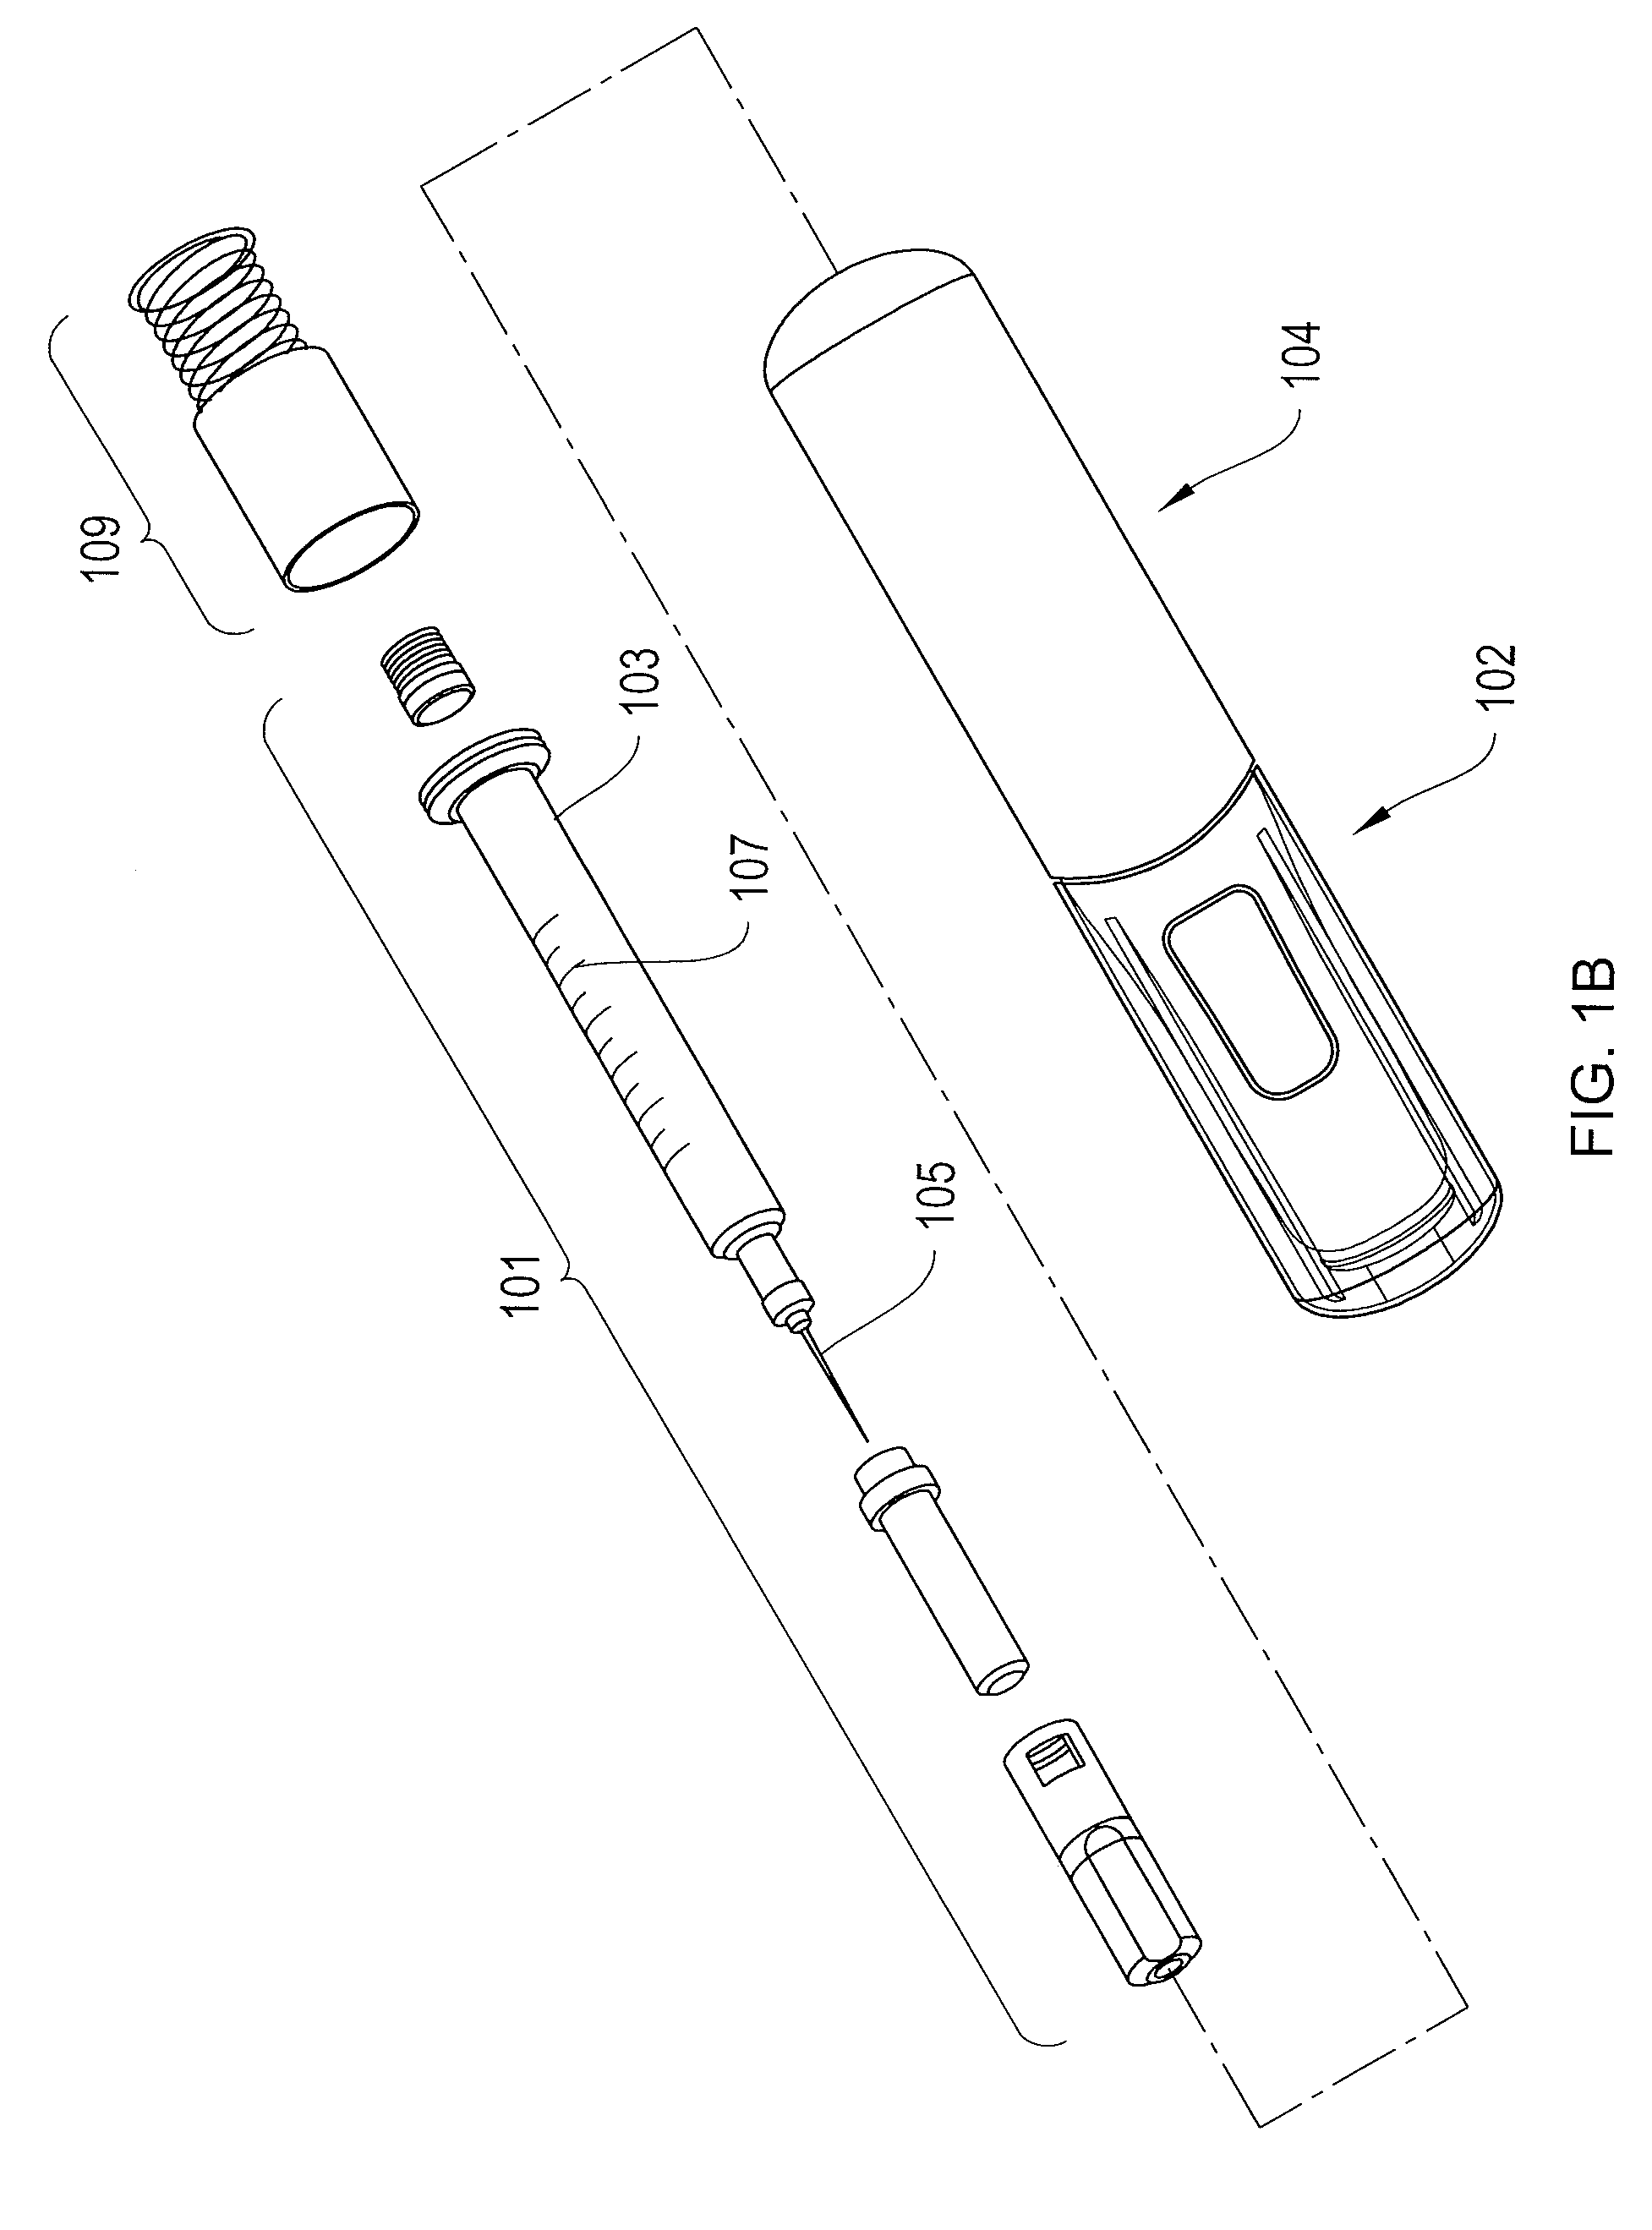 Systems for administering medication